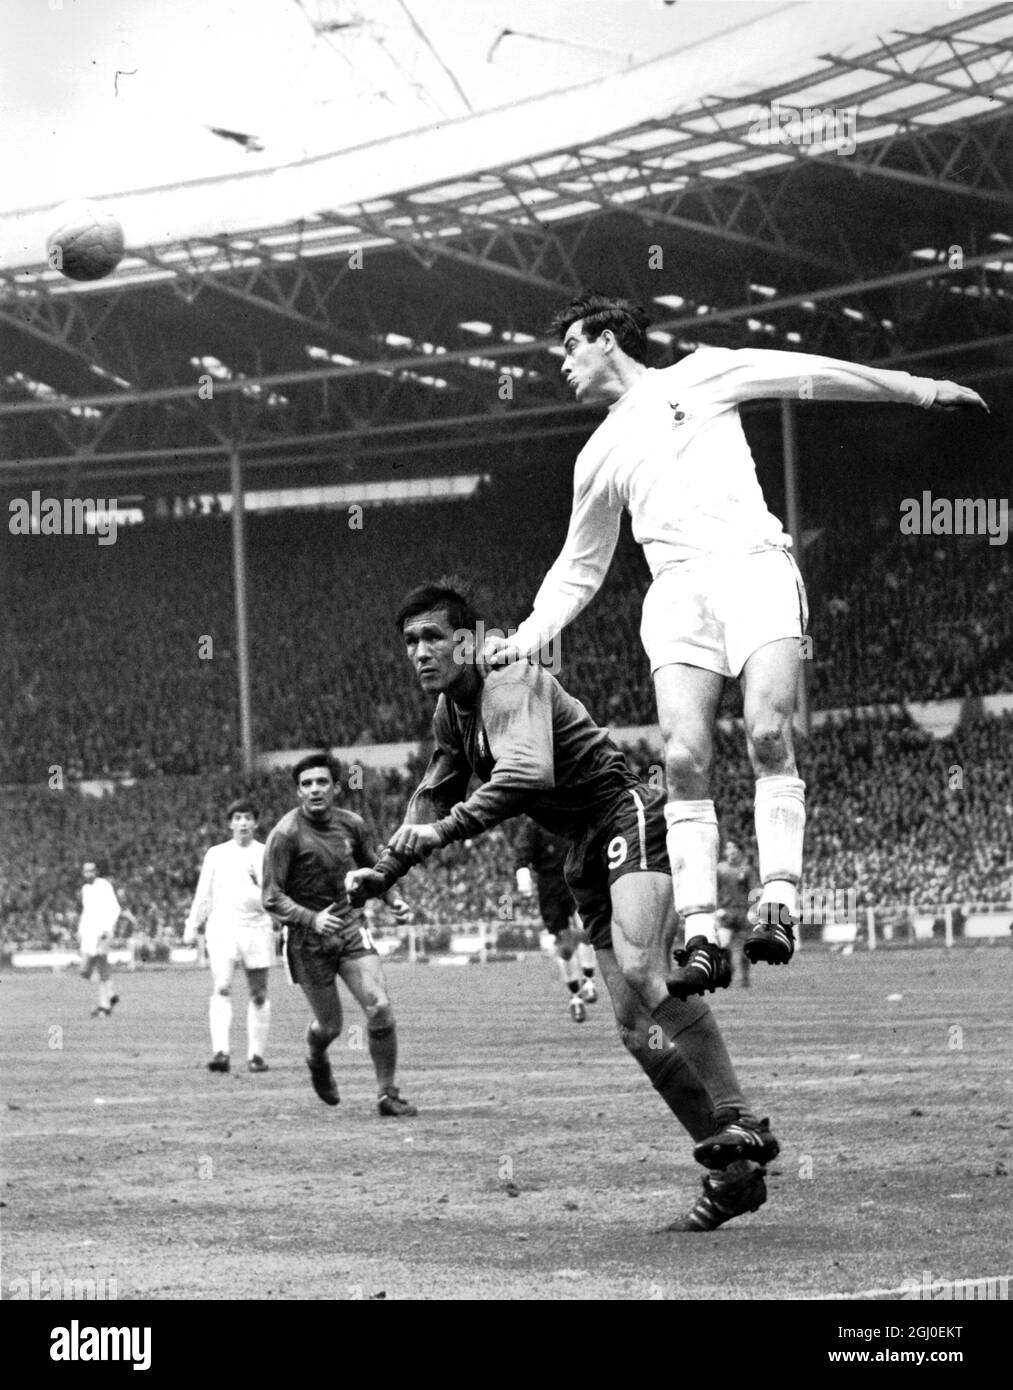 1967 FA Cup Final Chelsea v Tottenham Hotspur Mike England (Tottenham) outjumps Tony Hateley, the Chelsea centre forward to head the ball clear during the FA Cup Final. 20th May 1967. Stock Photo